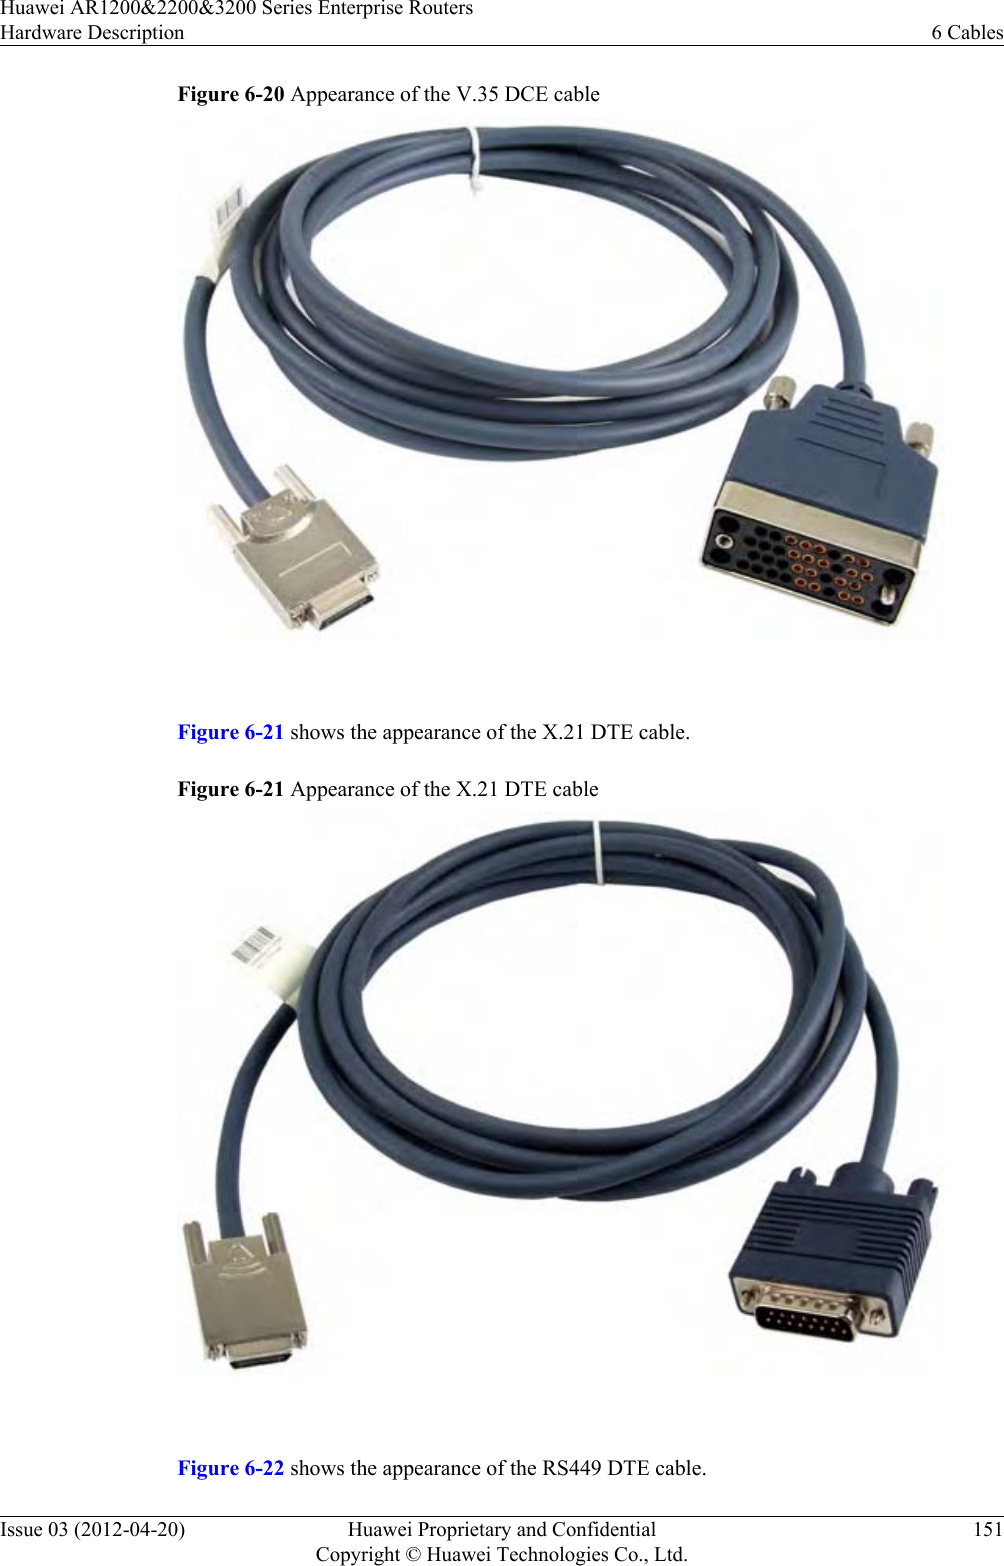 Figure 6-20 Appearance of the V.35 DCE cable Figure 6-21 shows the appearance of the X.21 DTE cable.Figure 6-21 Appearance of the X.21 DTE cable Figure 6-22 shows the appearance of the RS449 DTE cable.Huawei AR1200&amp;2200&amp;3200 Series Enterprise RoutersHardware Description 6 CablesIssue 03 (2012-04-20) Huawei Proprietary and ConfidentialCopyright © Huawei Technologies Co., Ltd.151